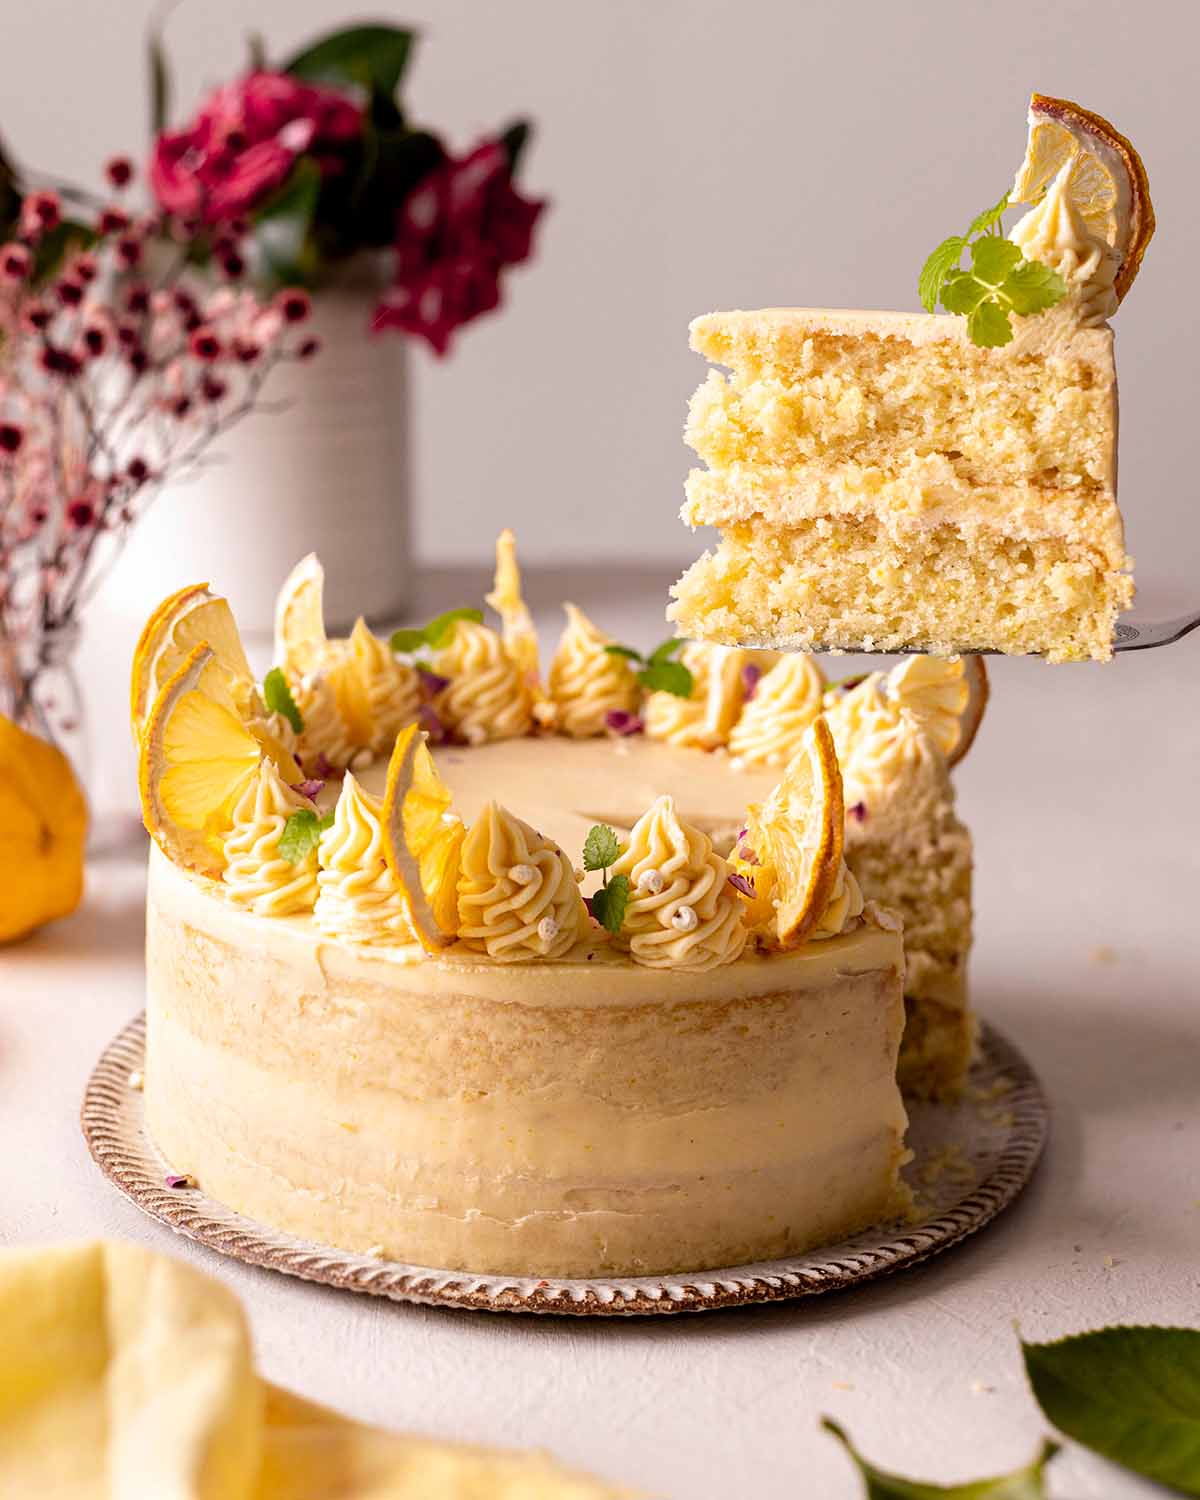 Stylized lemon cake with slice lifted up showing two fluffy cake layers.